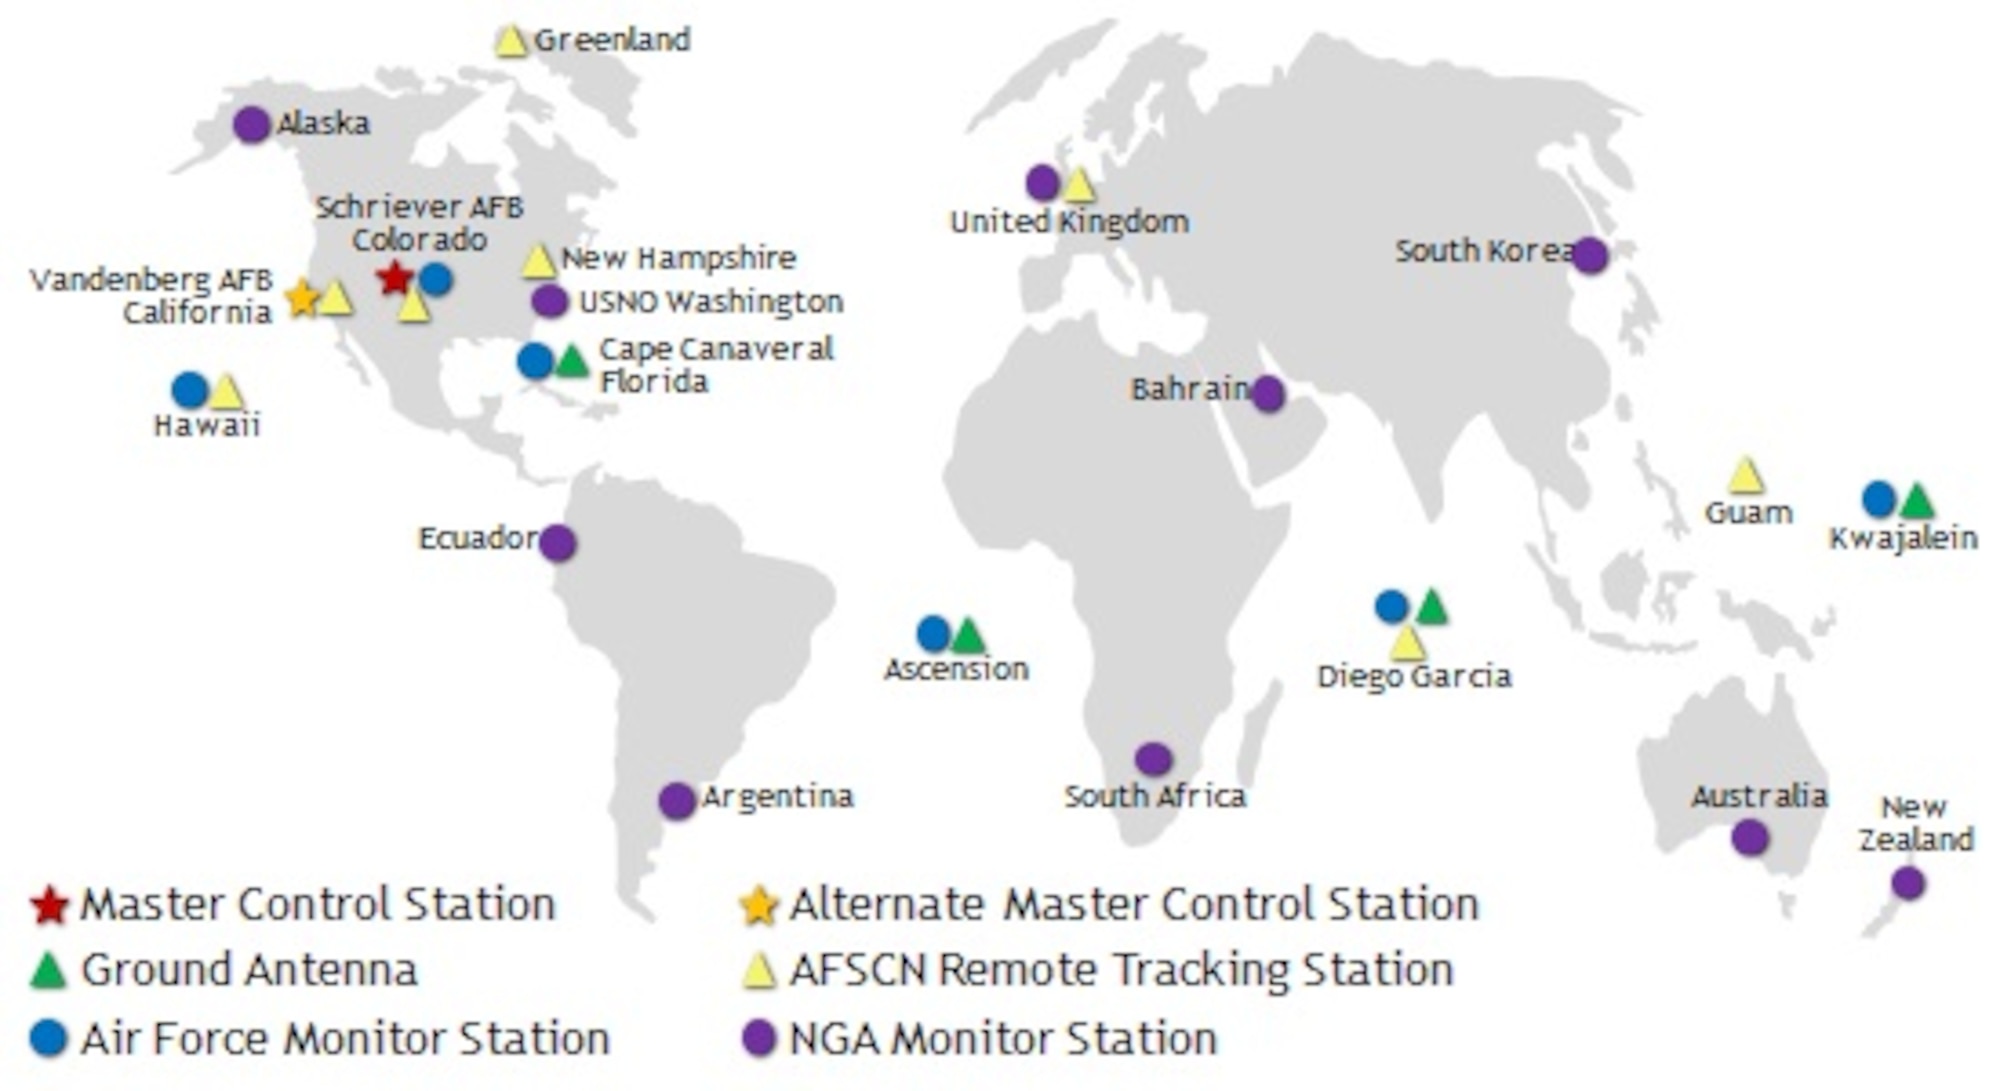 Current locations of GPS network of monitor stations that track navigation signals from GPS satellites and gather data on satellite performance worldwide. (Courtesy graphic) 